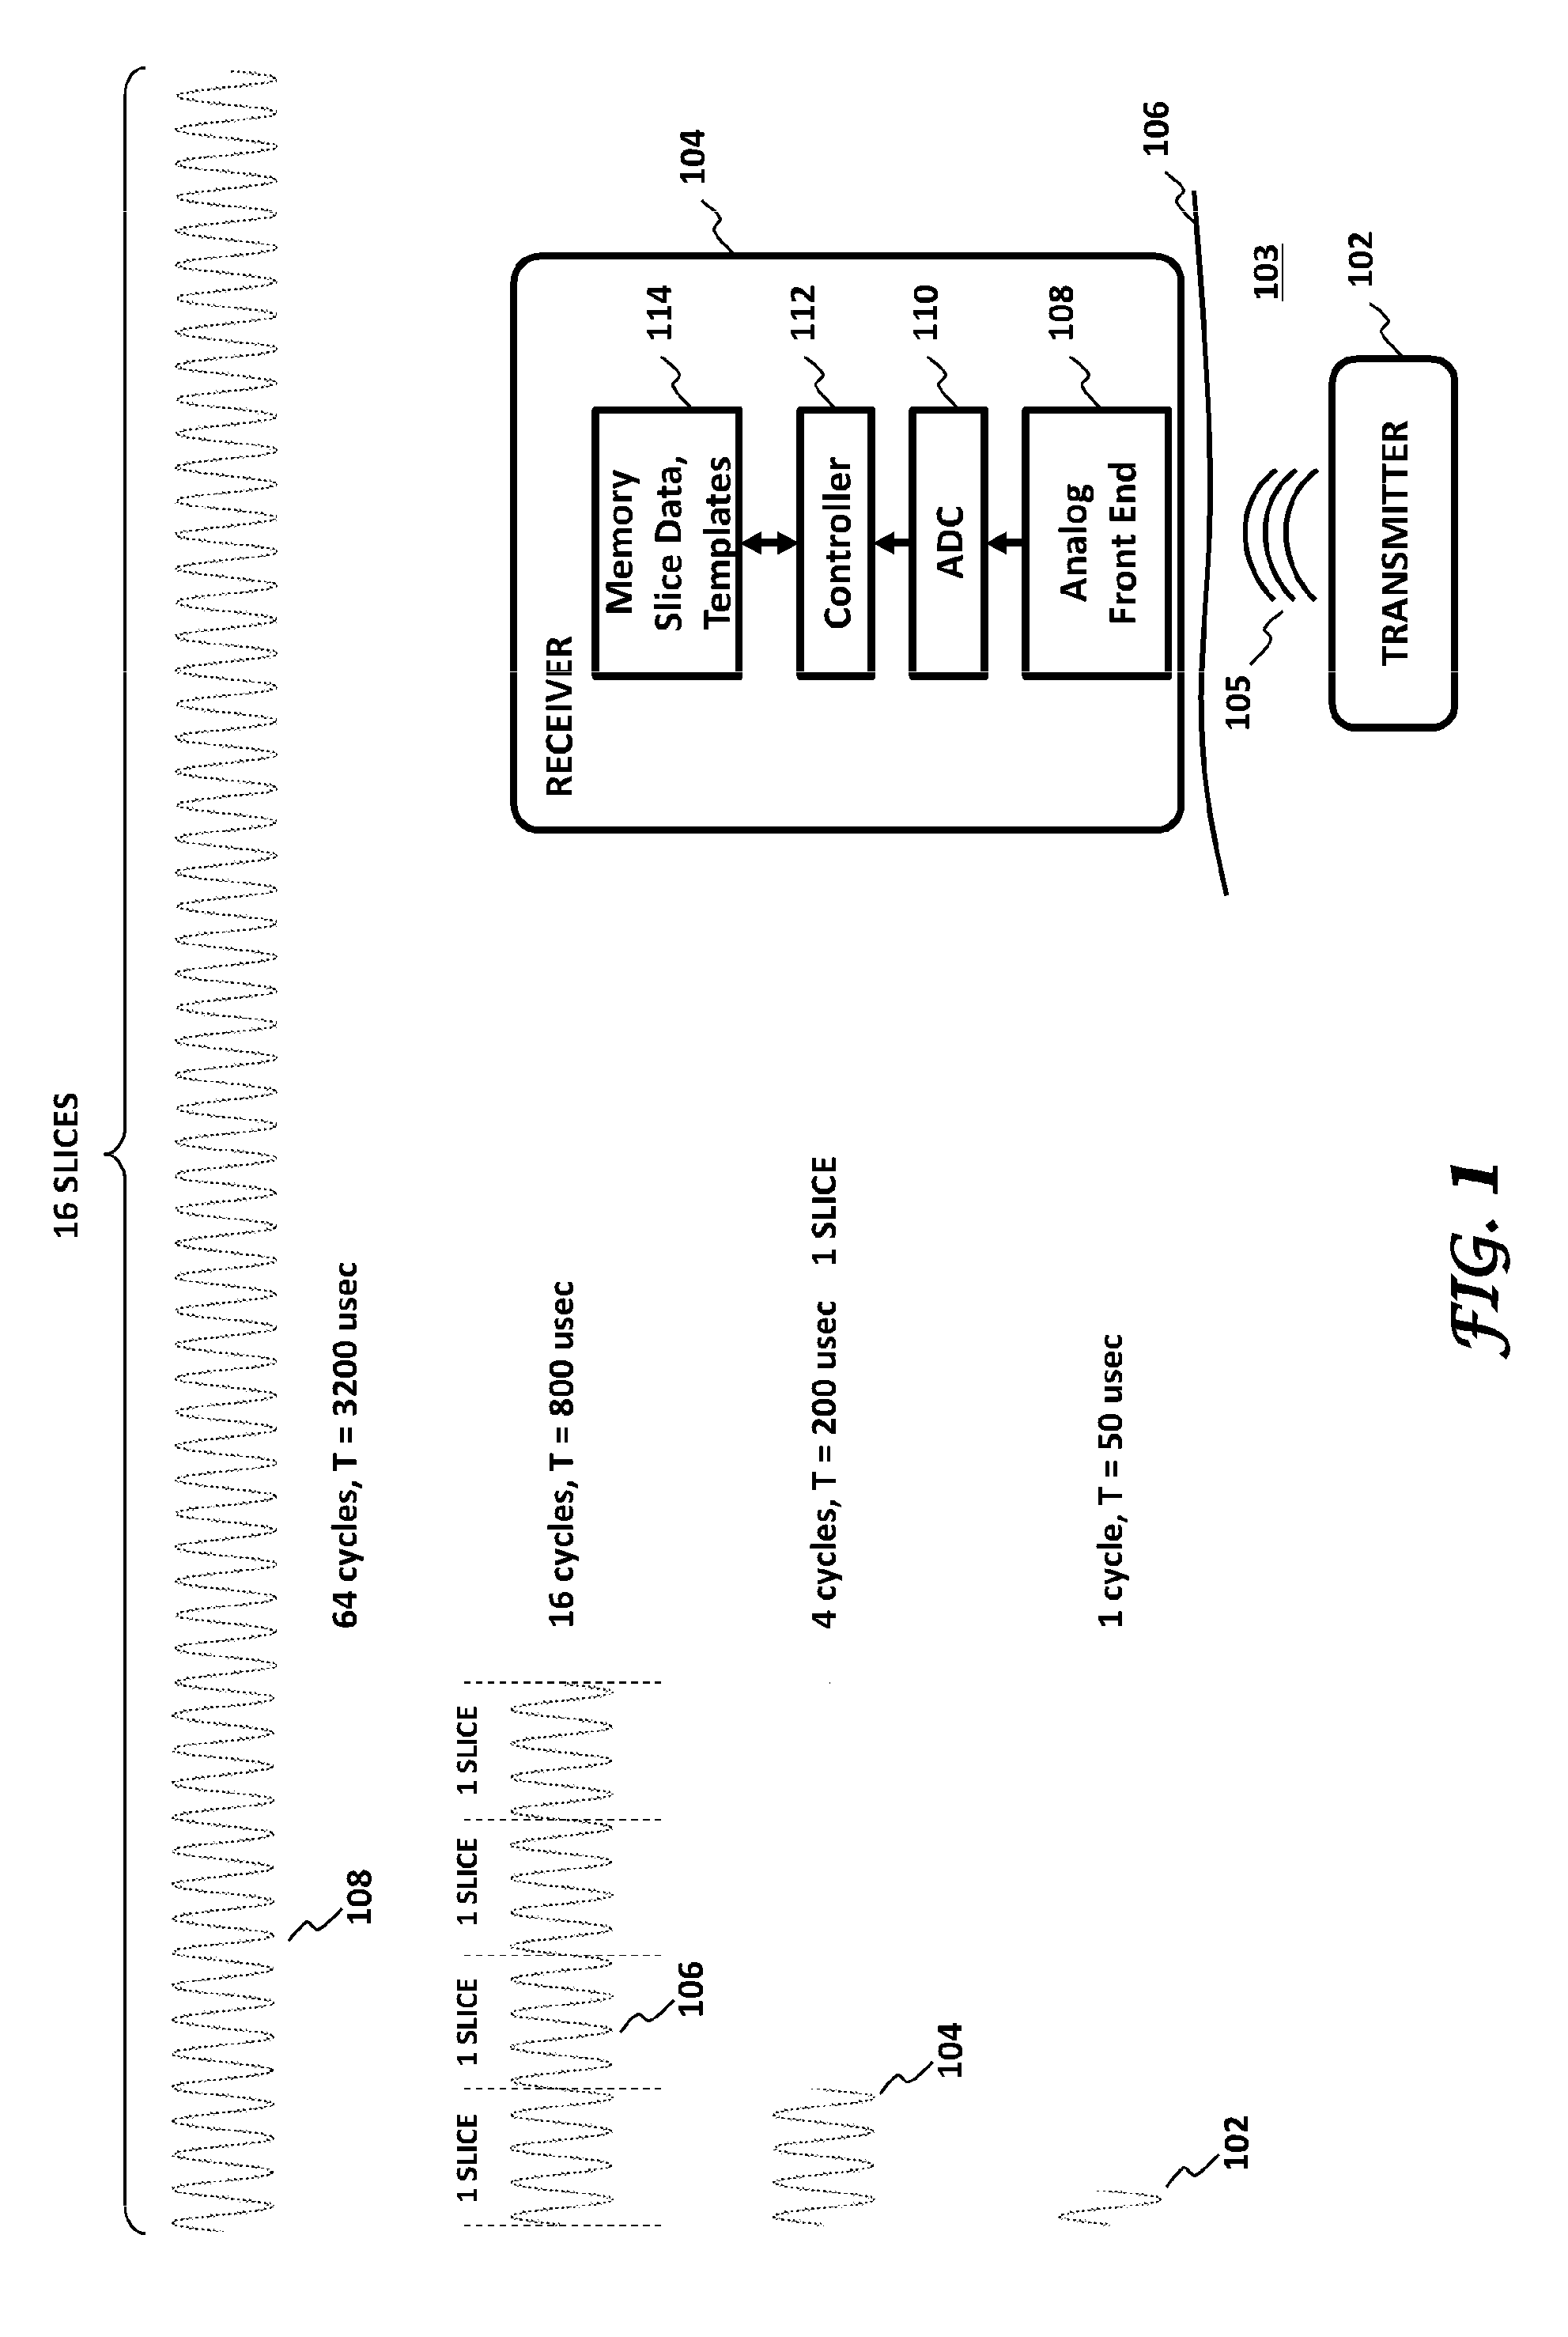 Methods, devices and systems for receiving and decoding a signal in the presence of noise using slices and warping